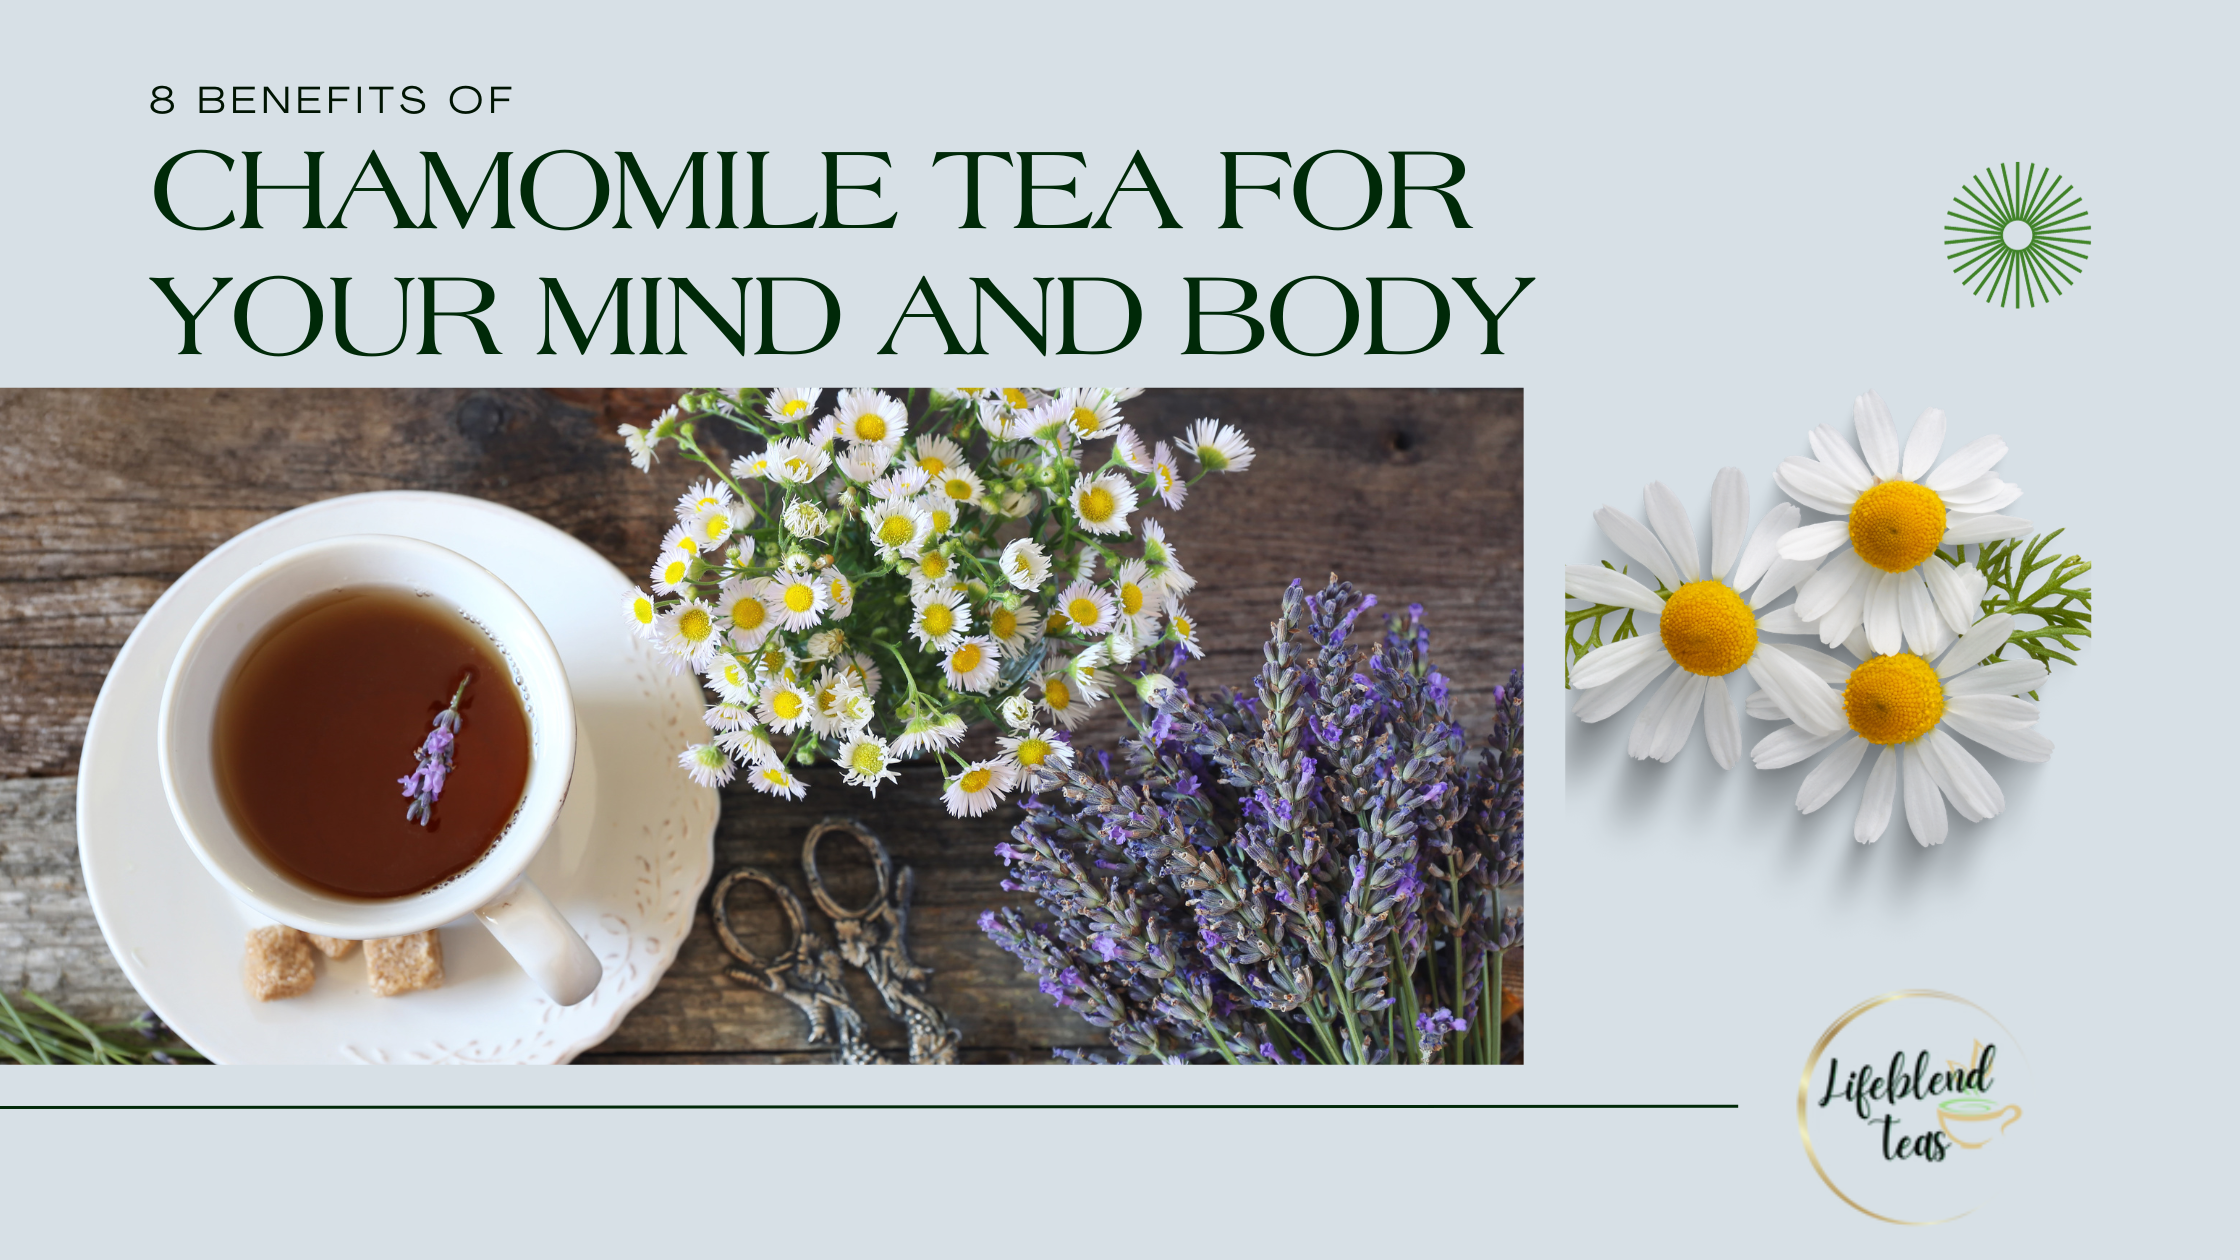 8 Benefits of Chamomile Tea for Your Mind and Body